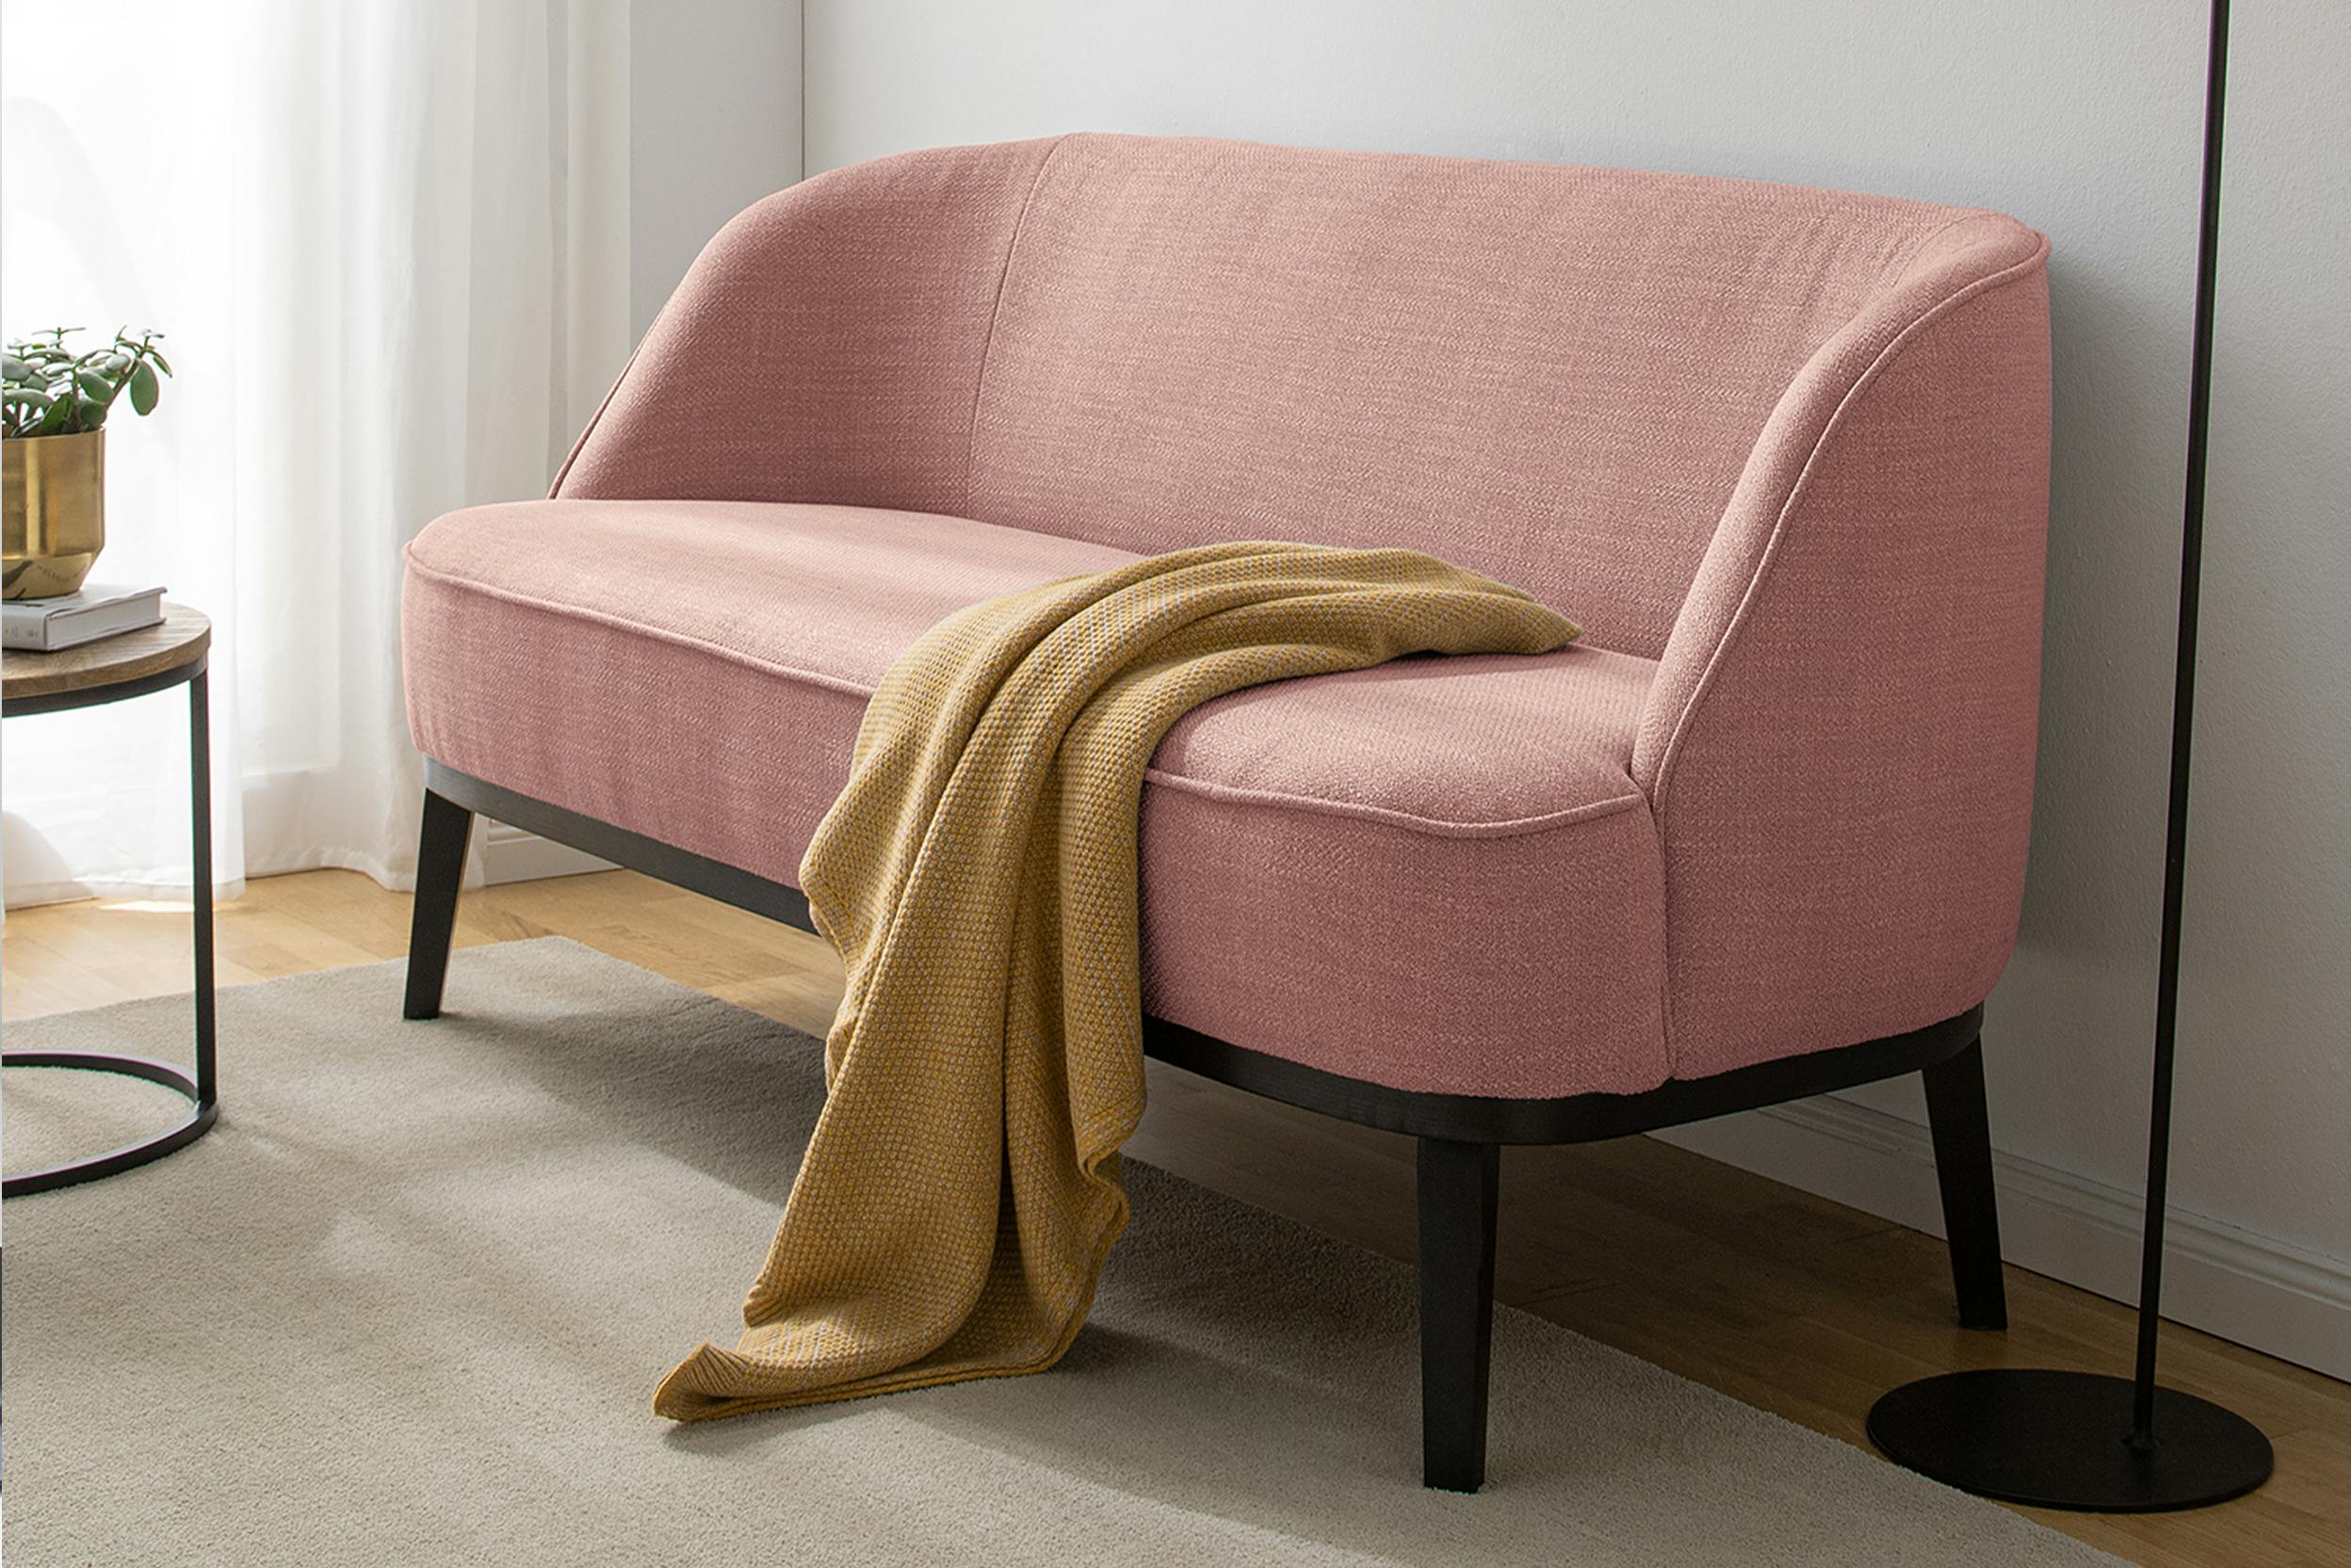 Bequemes rosa Polstersofa